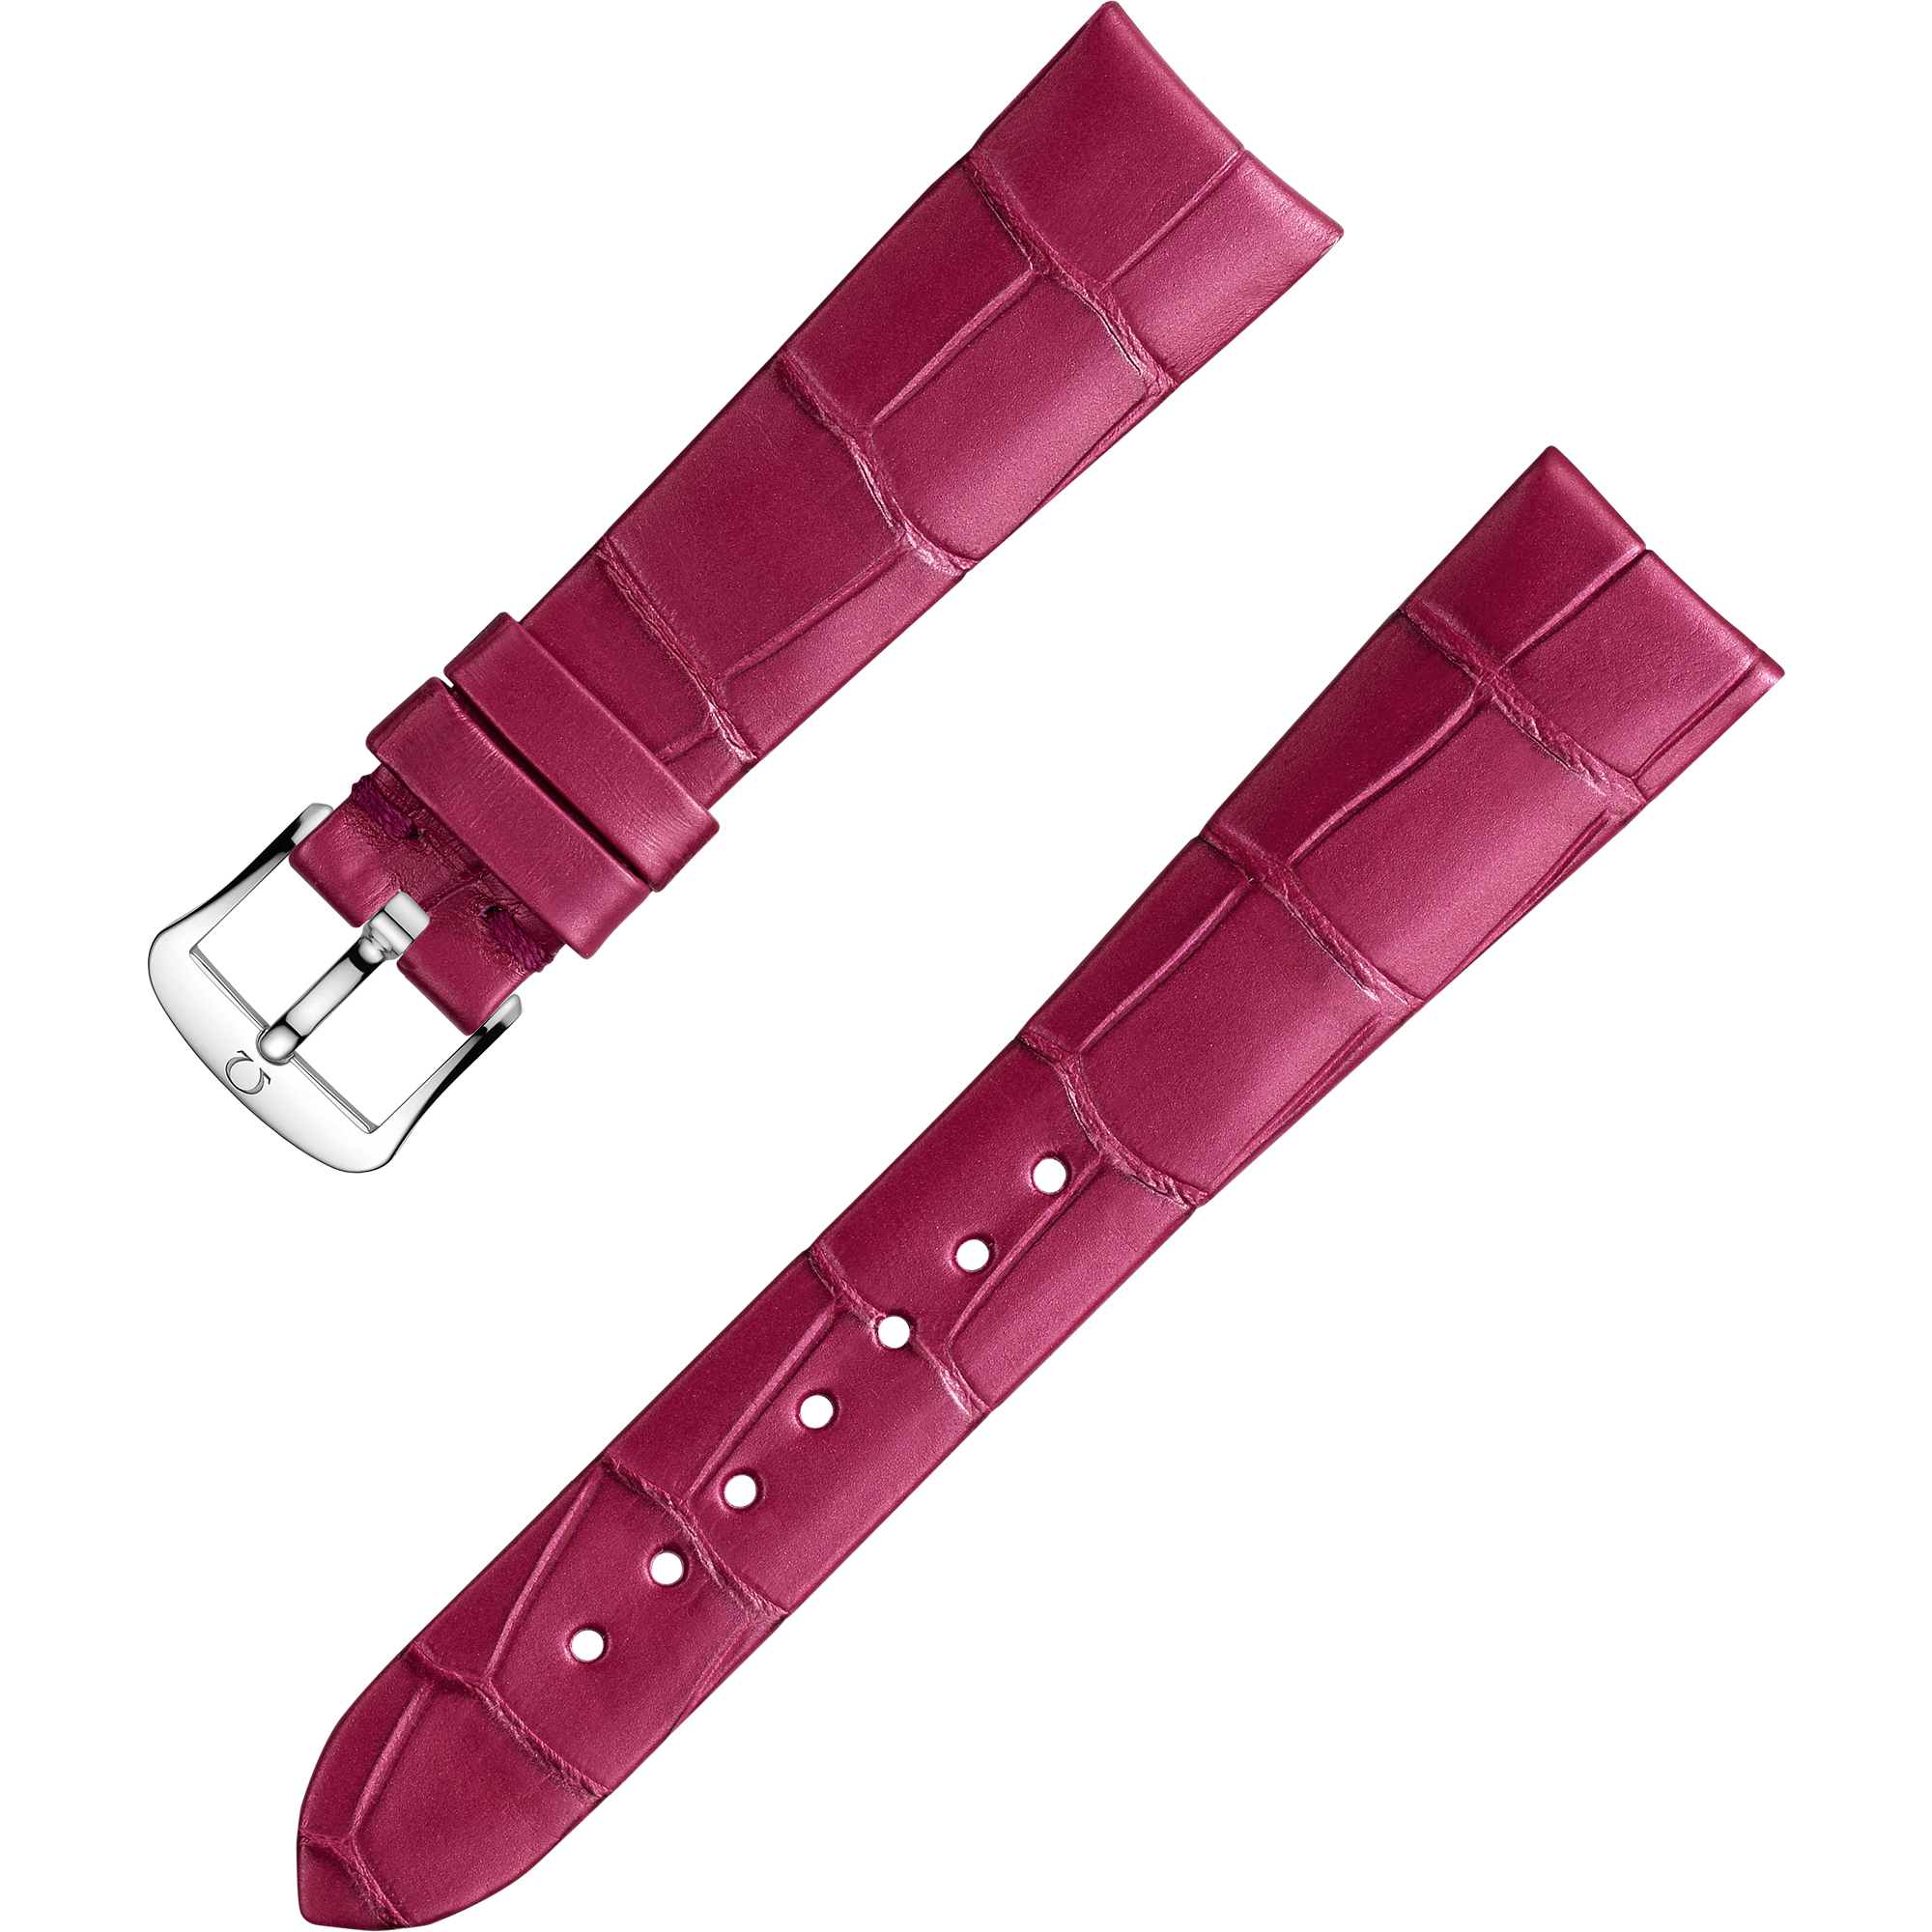 Two-piece strap - Pink alligator leather strap with pin buckle - 032CUZ011104W